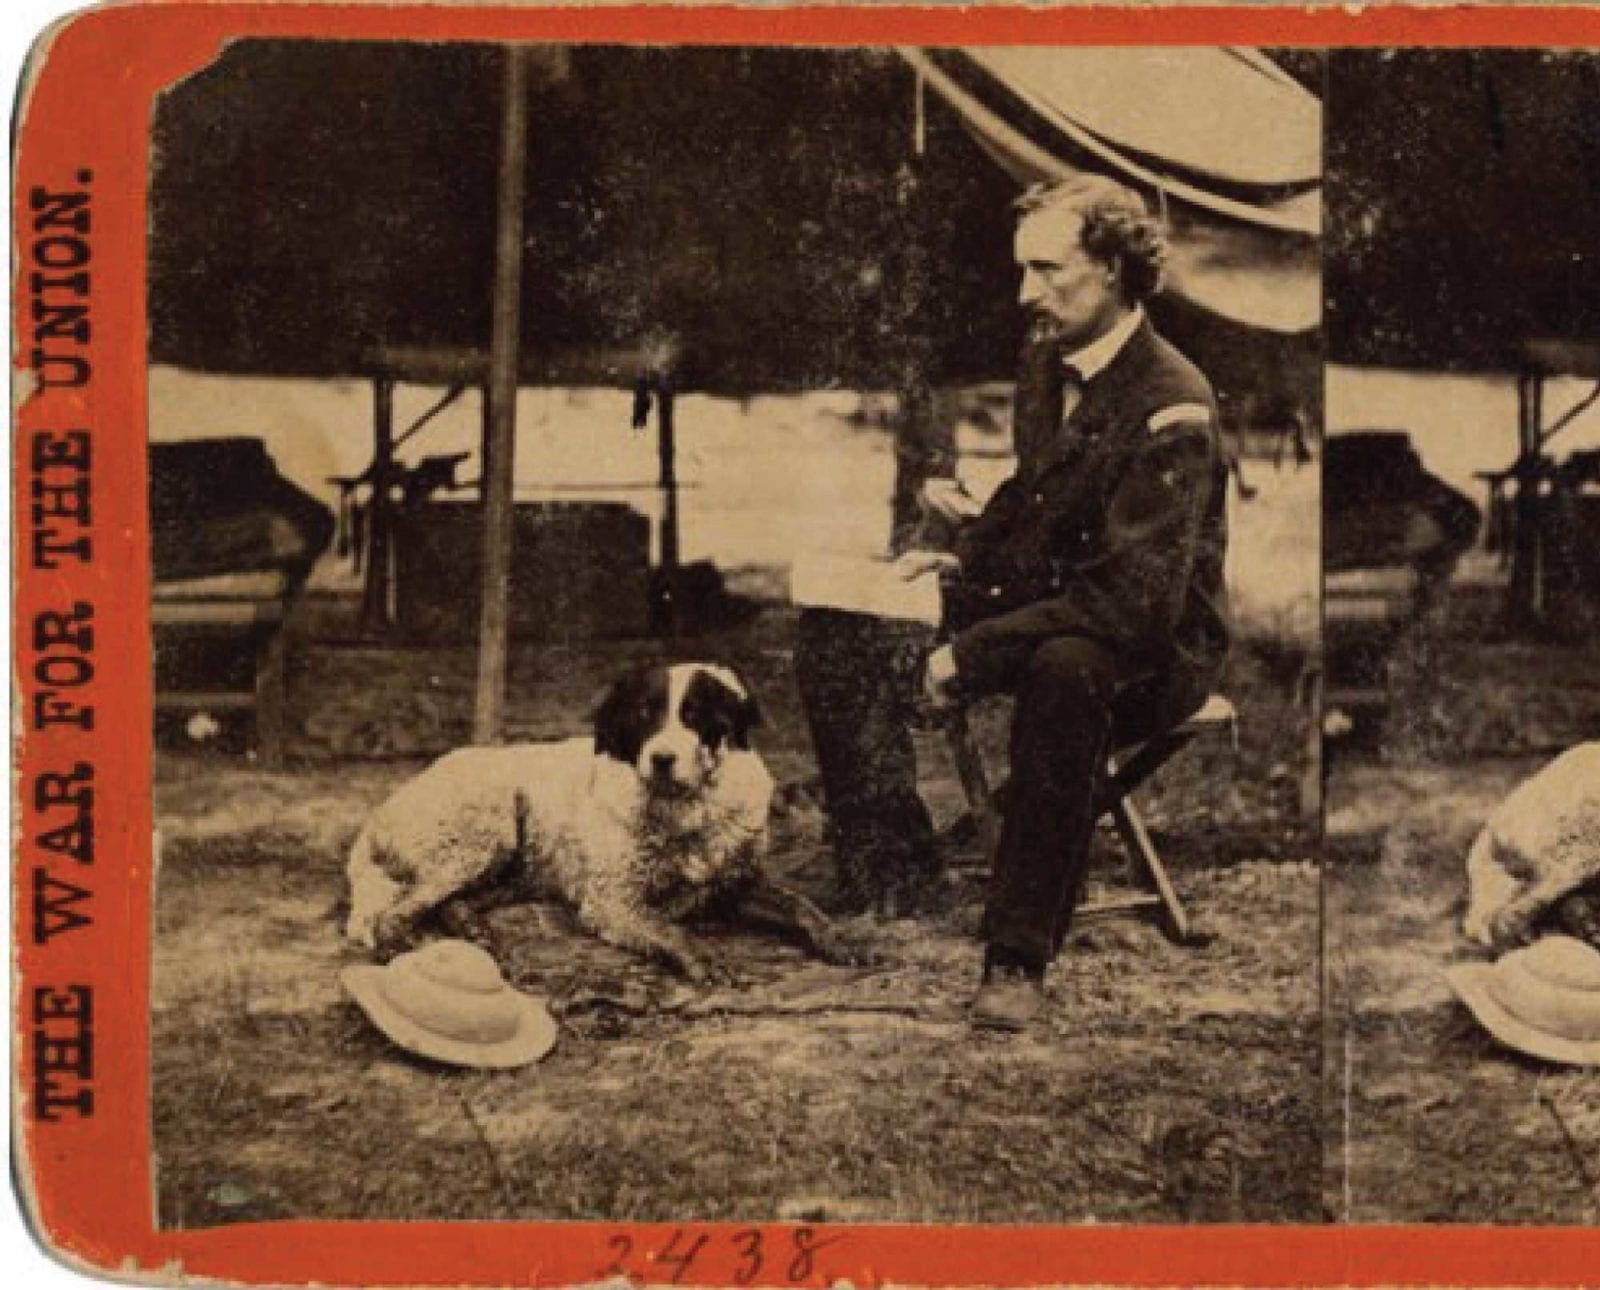 General Custer and his Newfoundland Dog